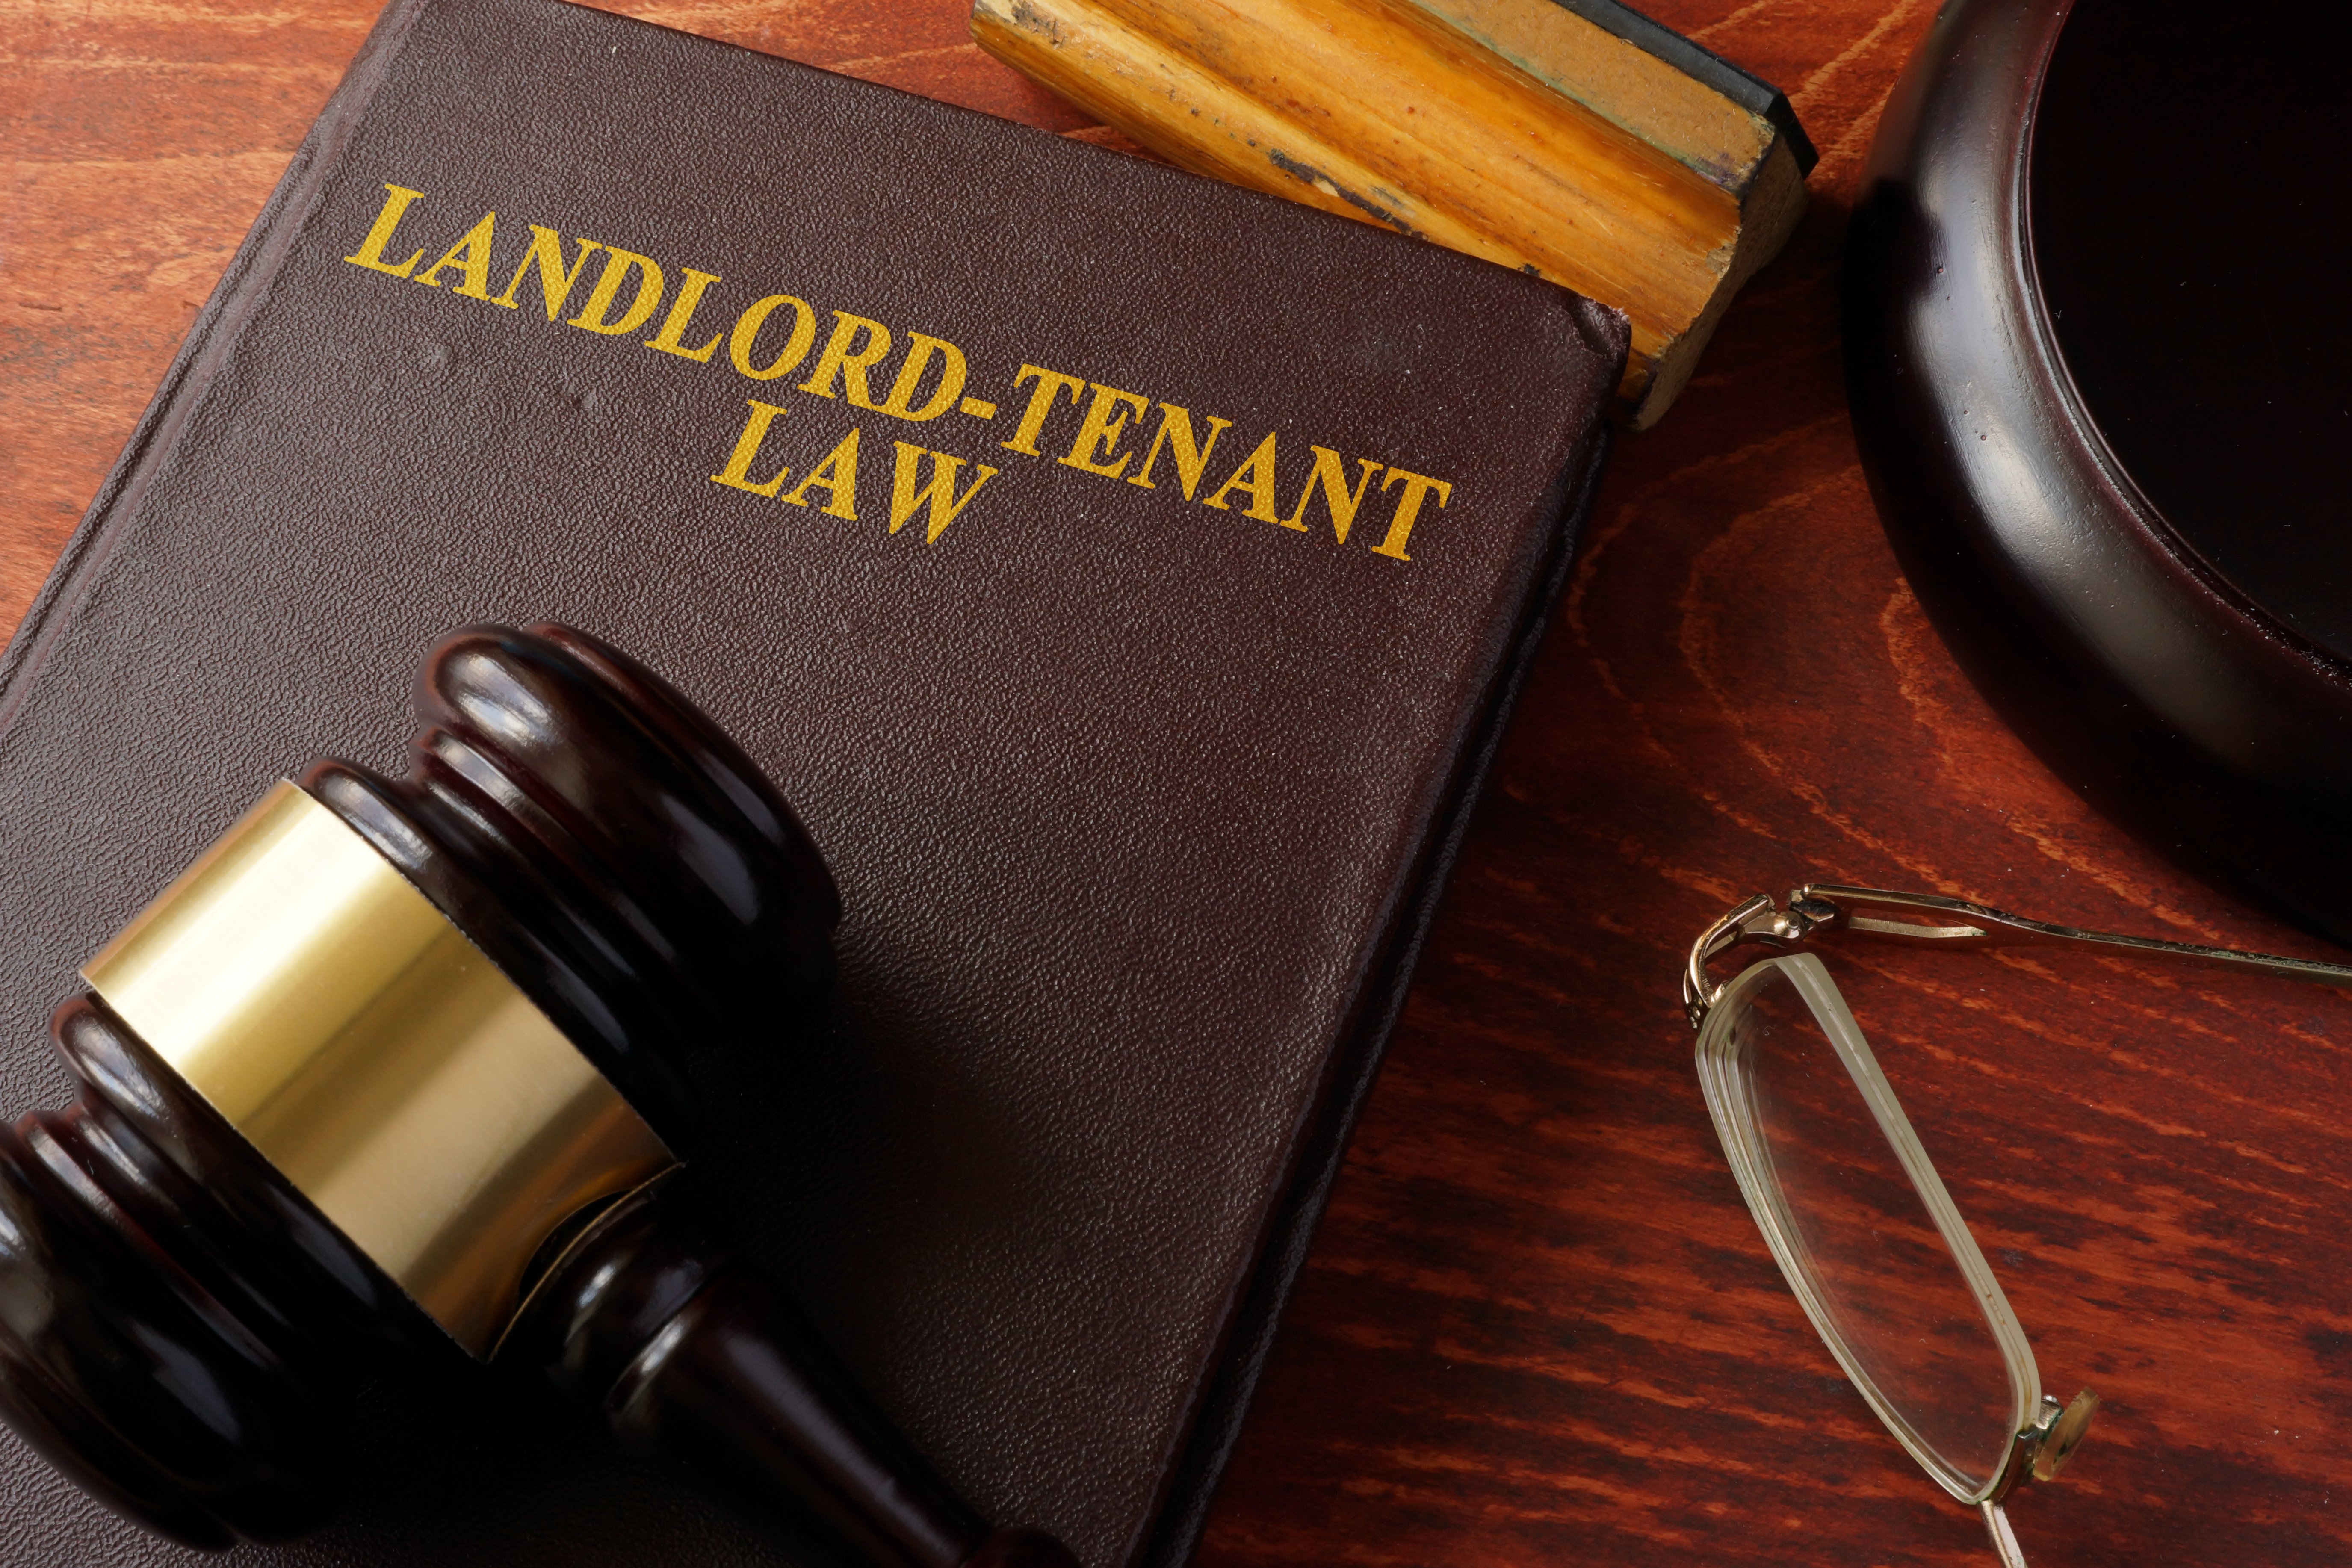 landlord tenant law book on desk with gavel